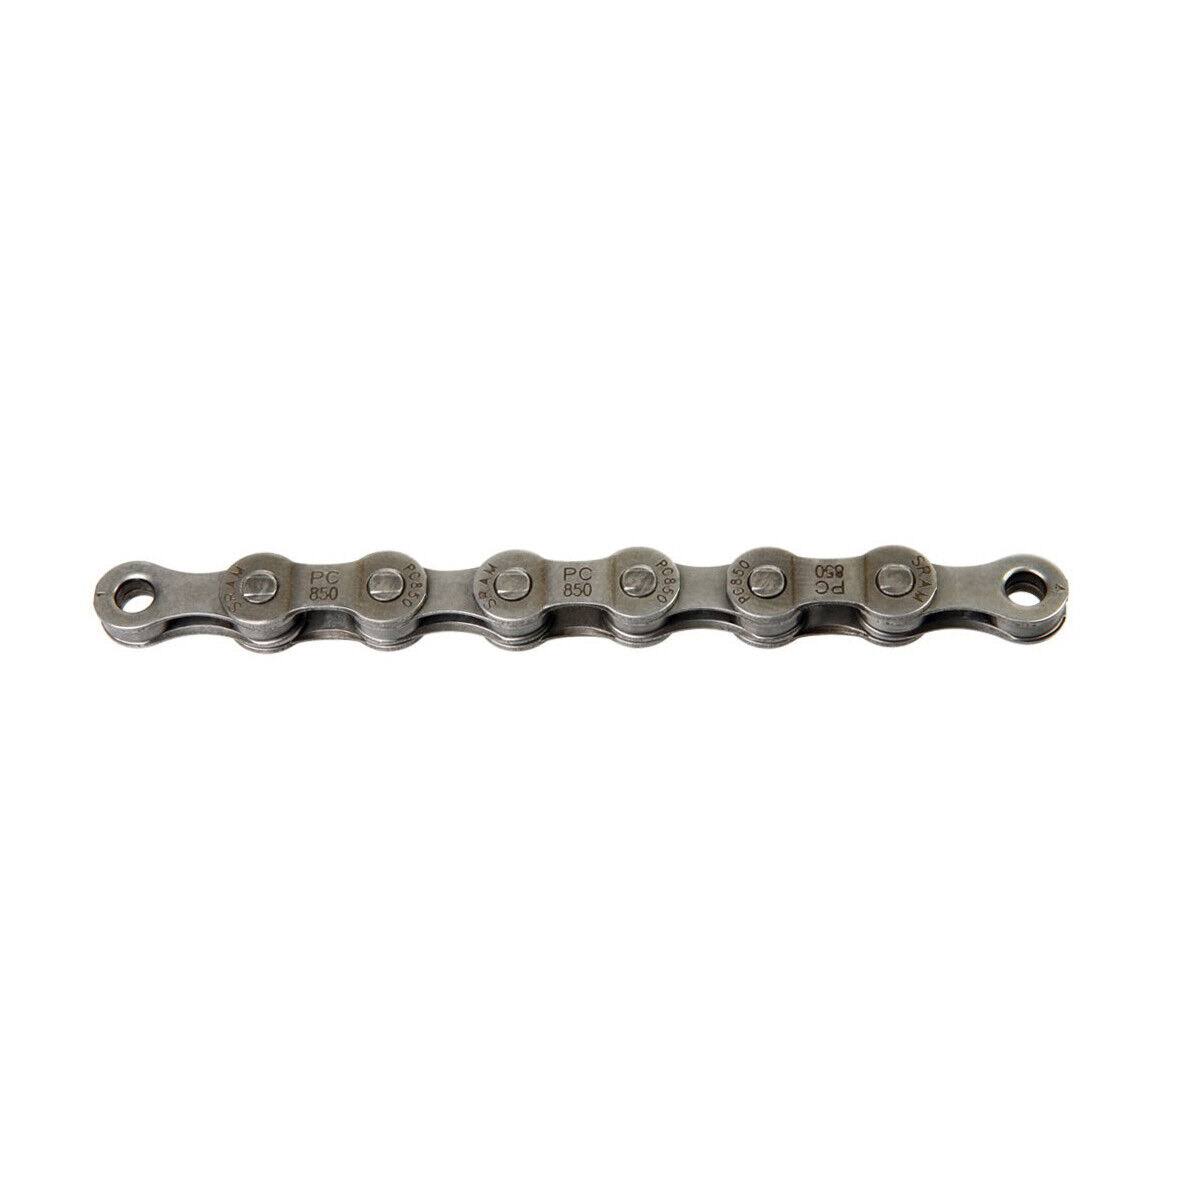 Sram PC 850 P-Link Bicycle Chain - 8 Speed, Grey